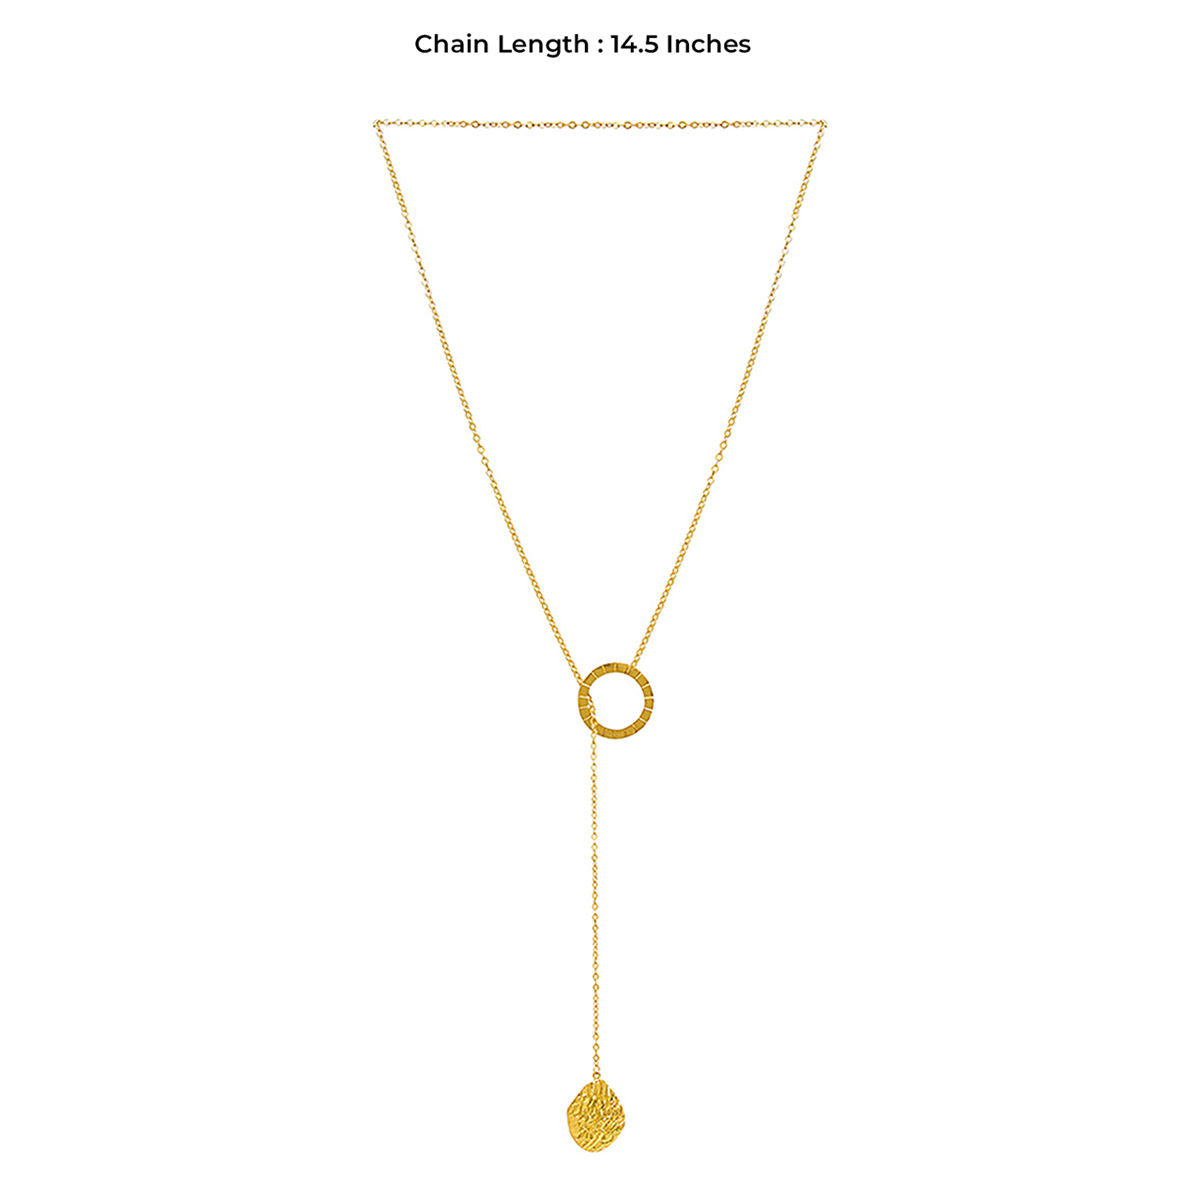 Statement Gold Toned Long Necklace with a textured Pendant